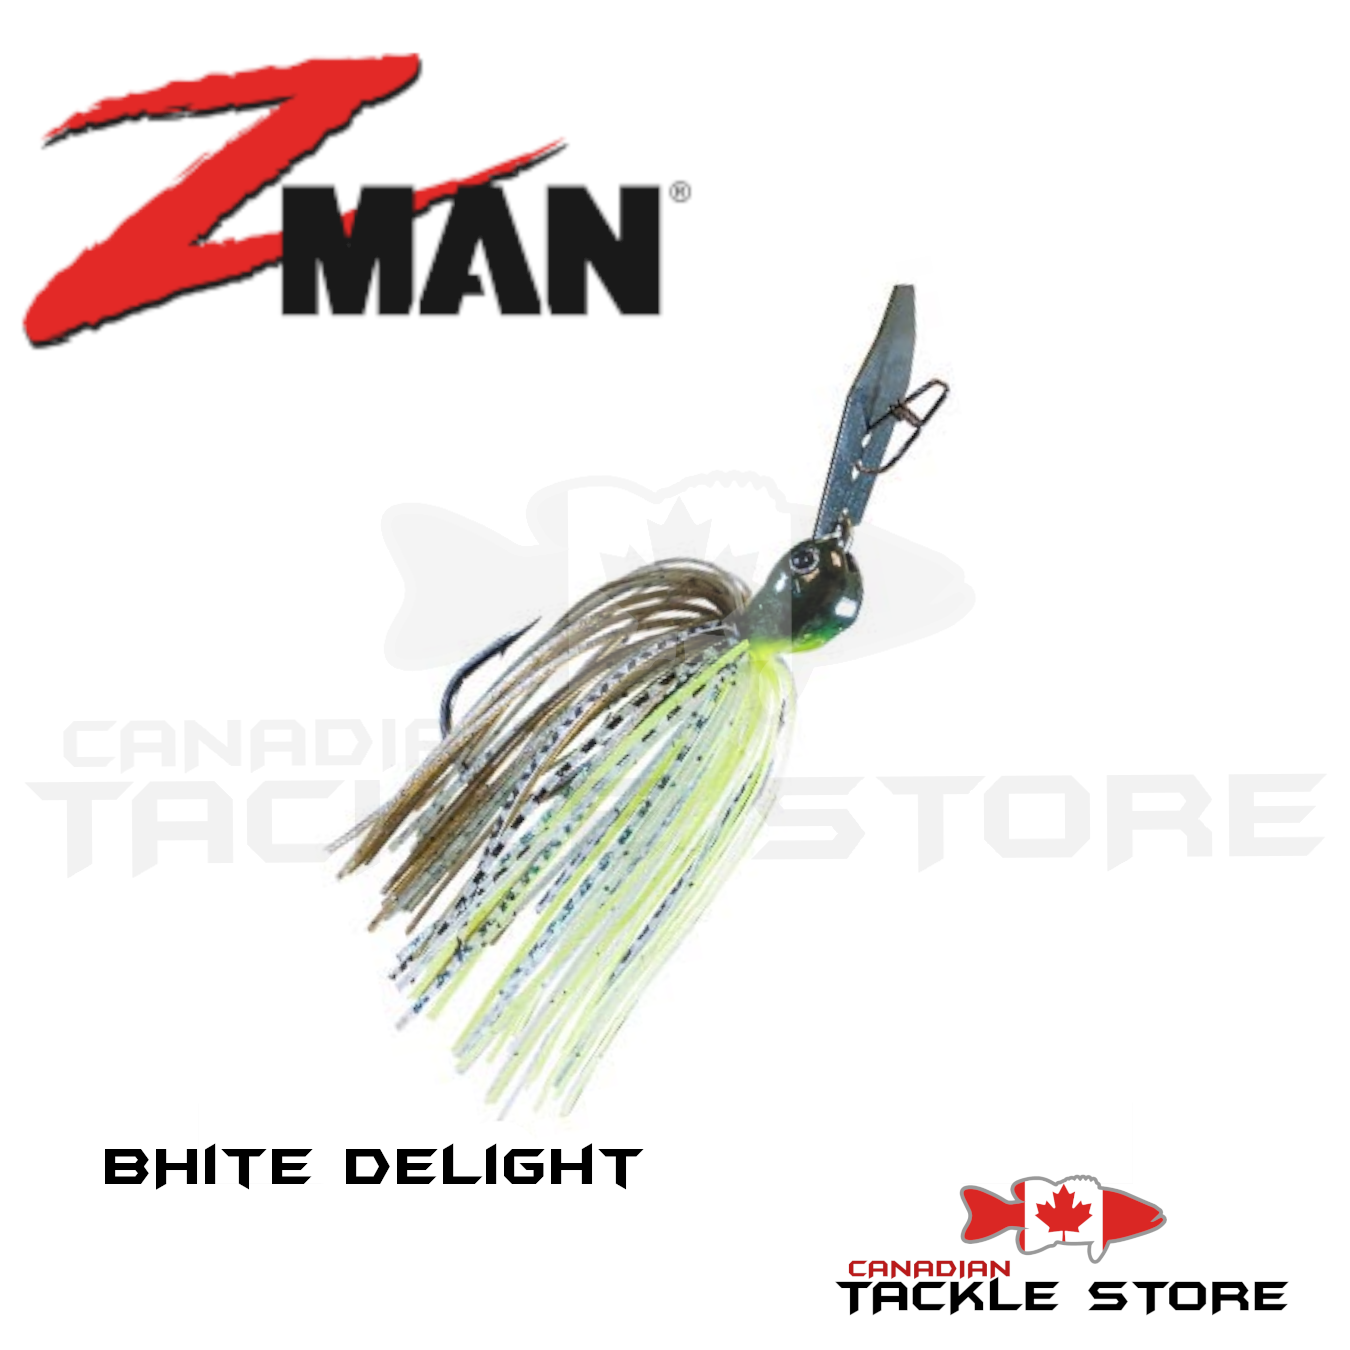 Z-Man – Canadian Tackle Store